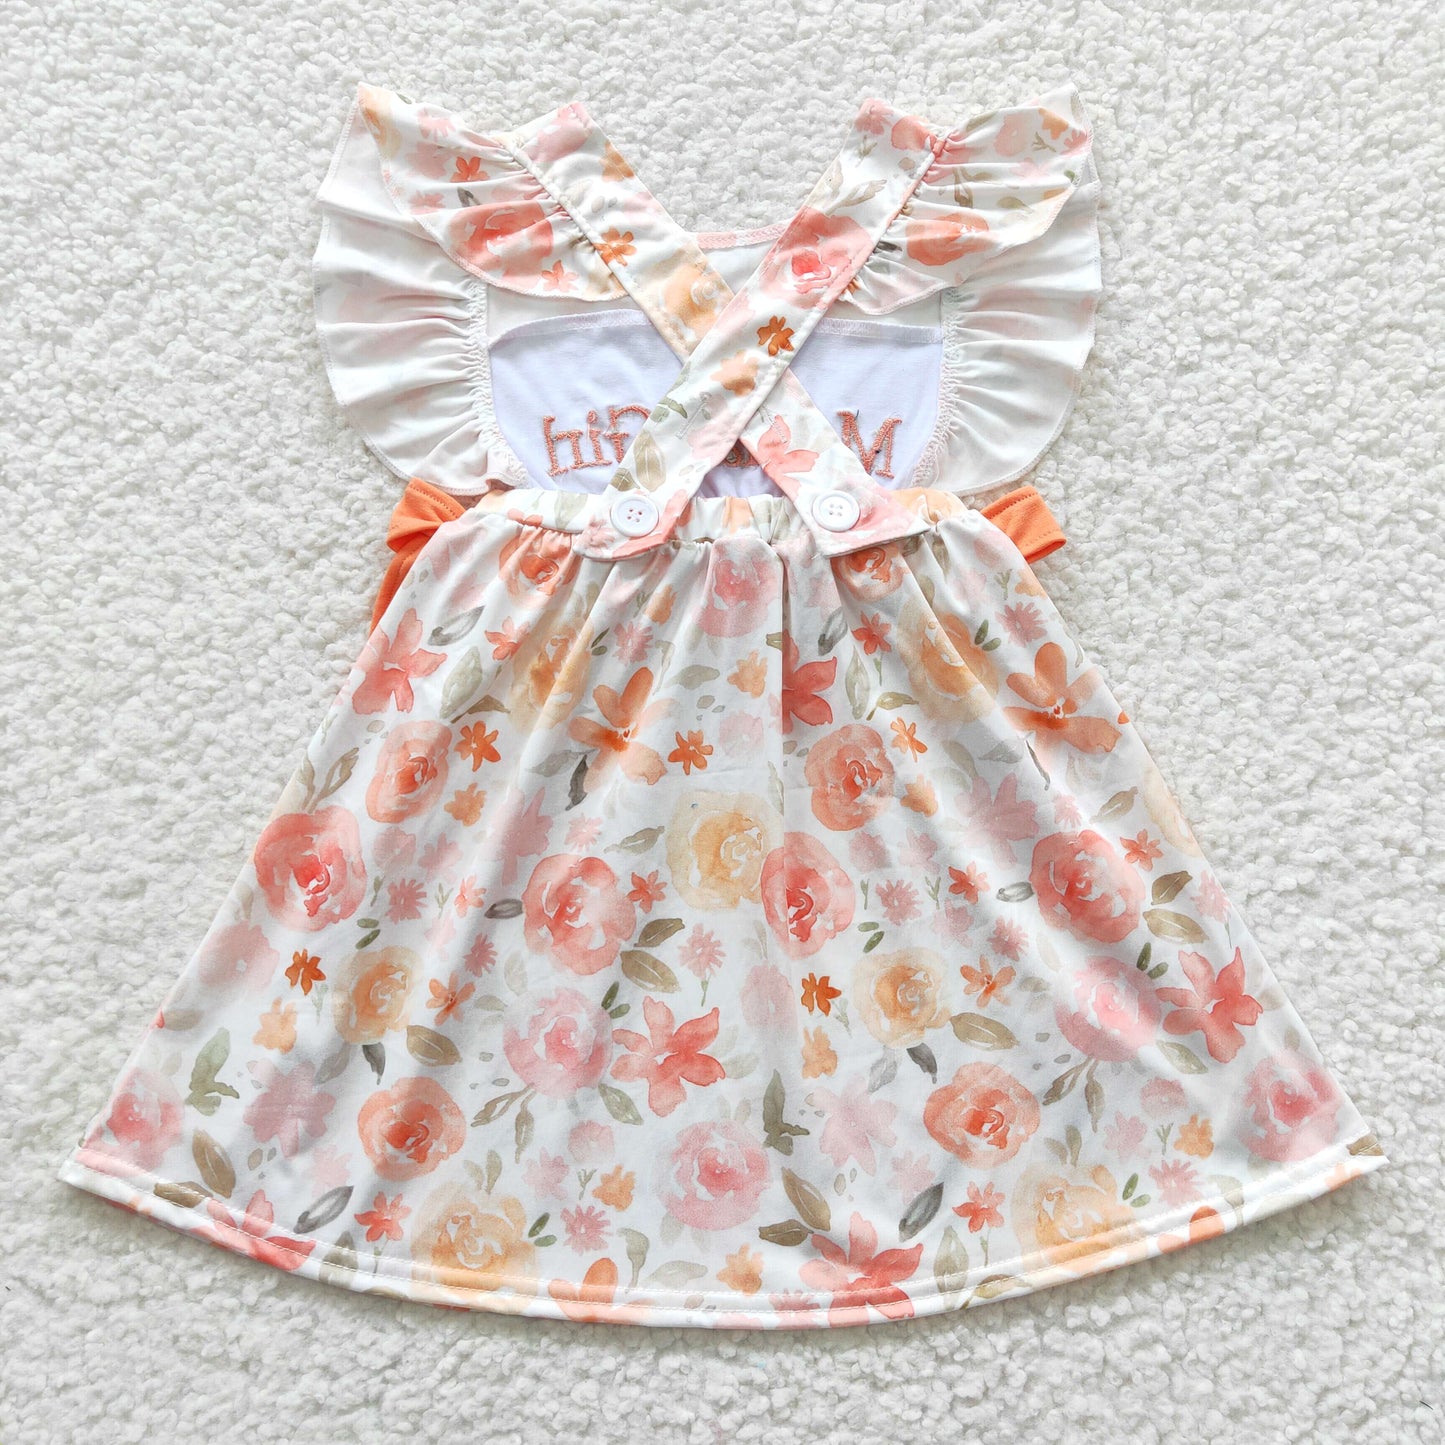 mama's girl orange floral bow embroidered dress